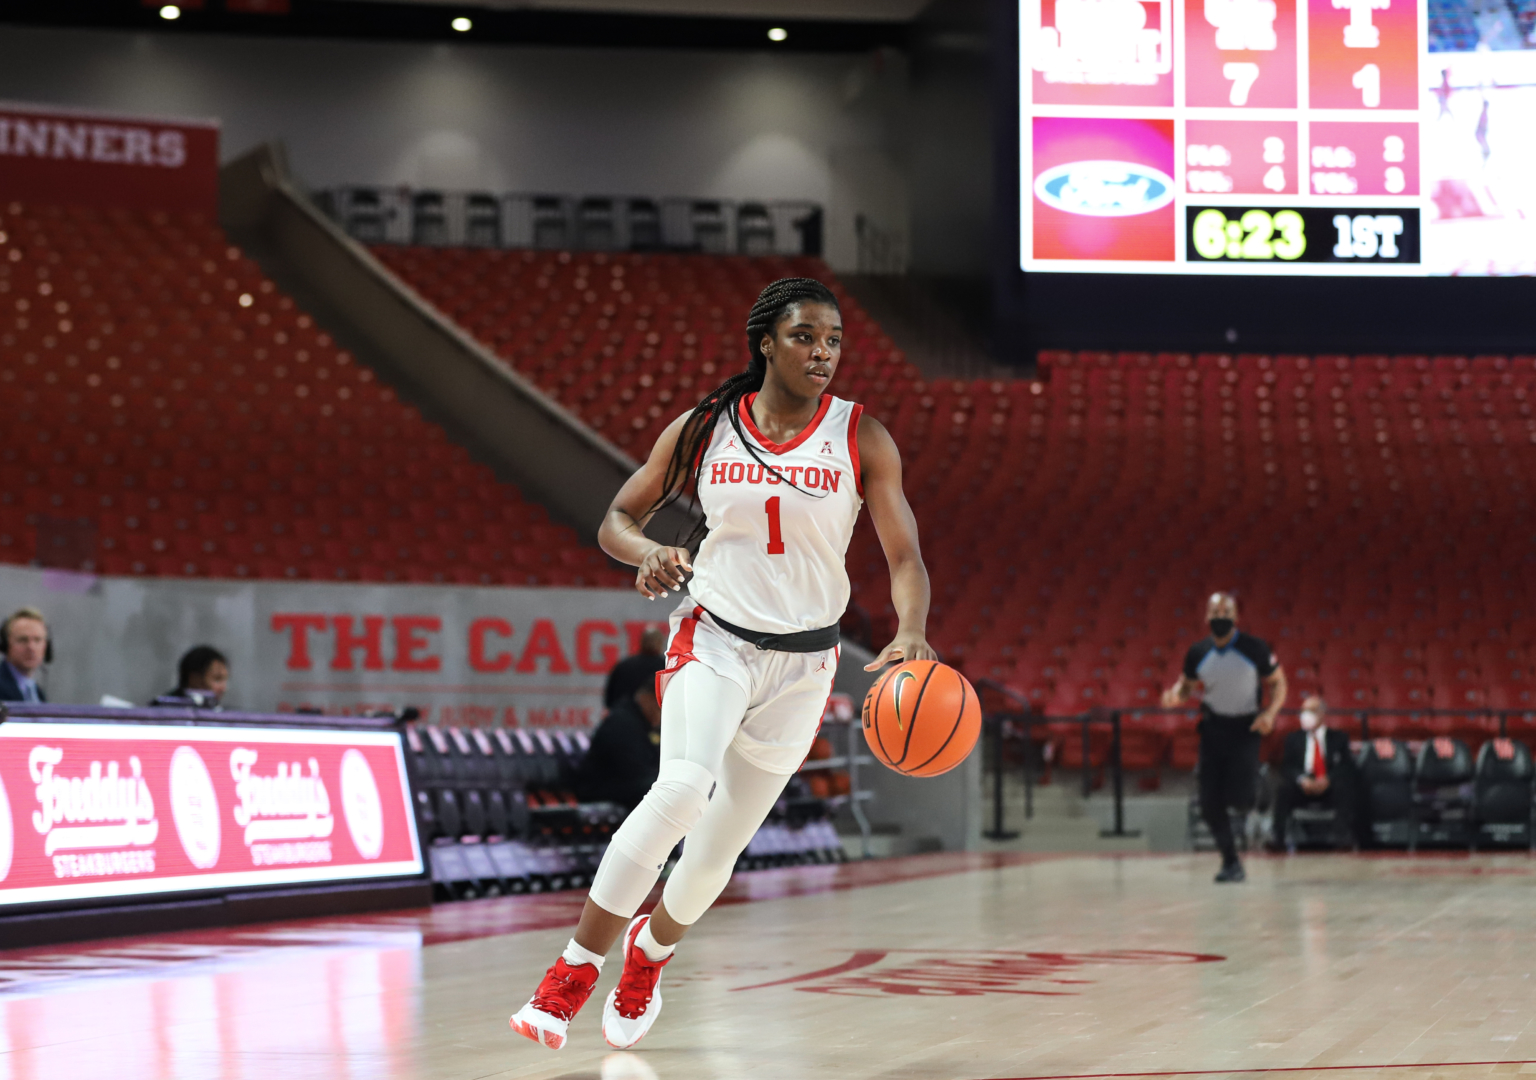 Bria Patterson led the UH women's basketball team with 18 points in the victory over LA Tech. | Sean Thomas/The Cougar